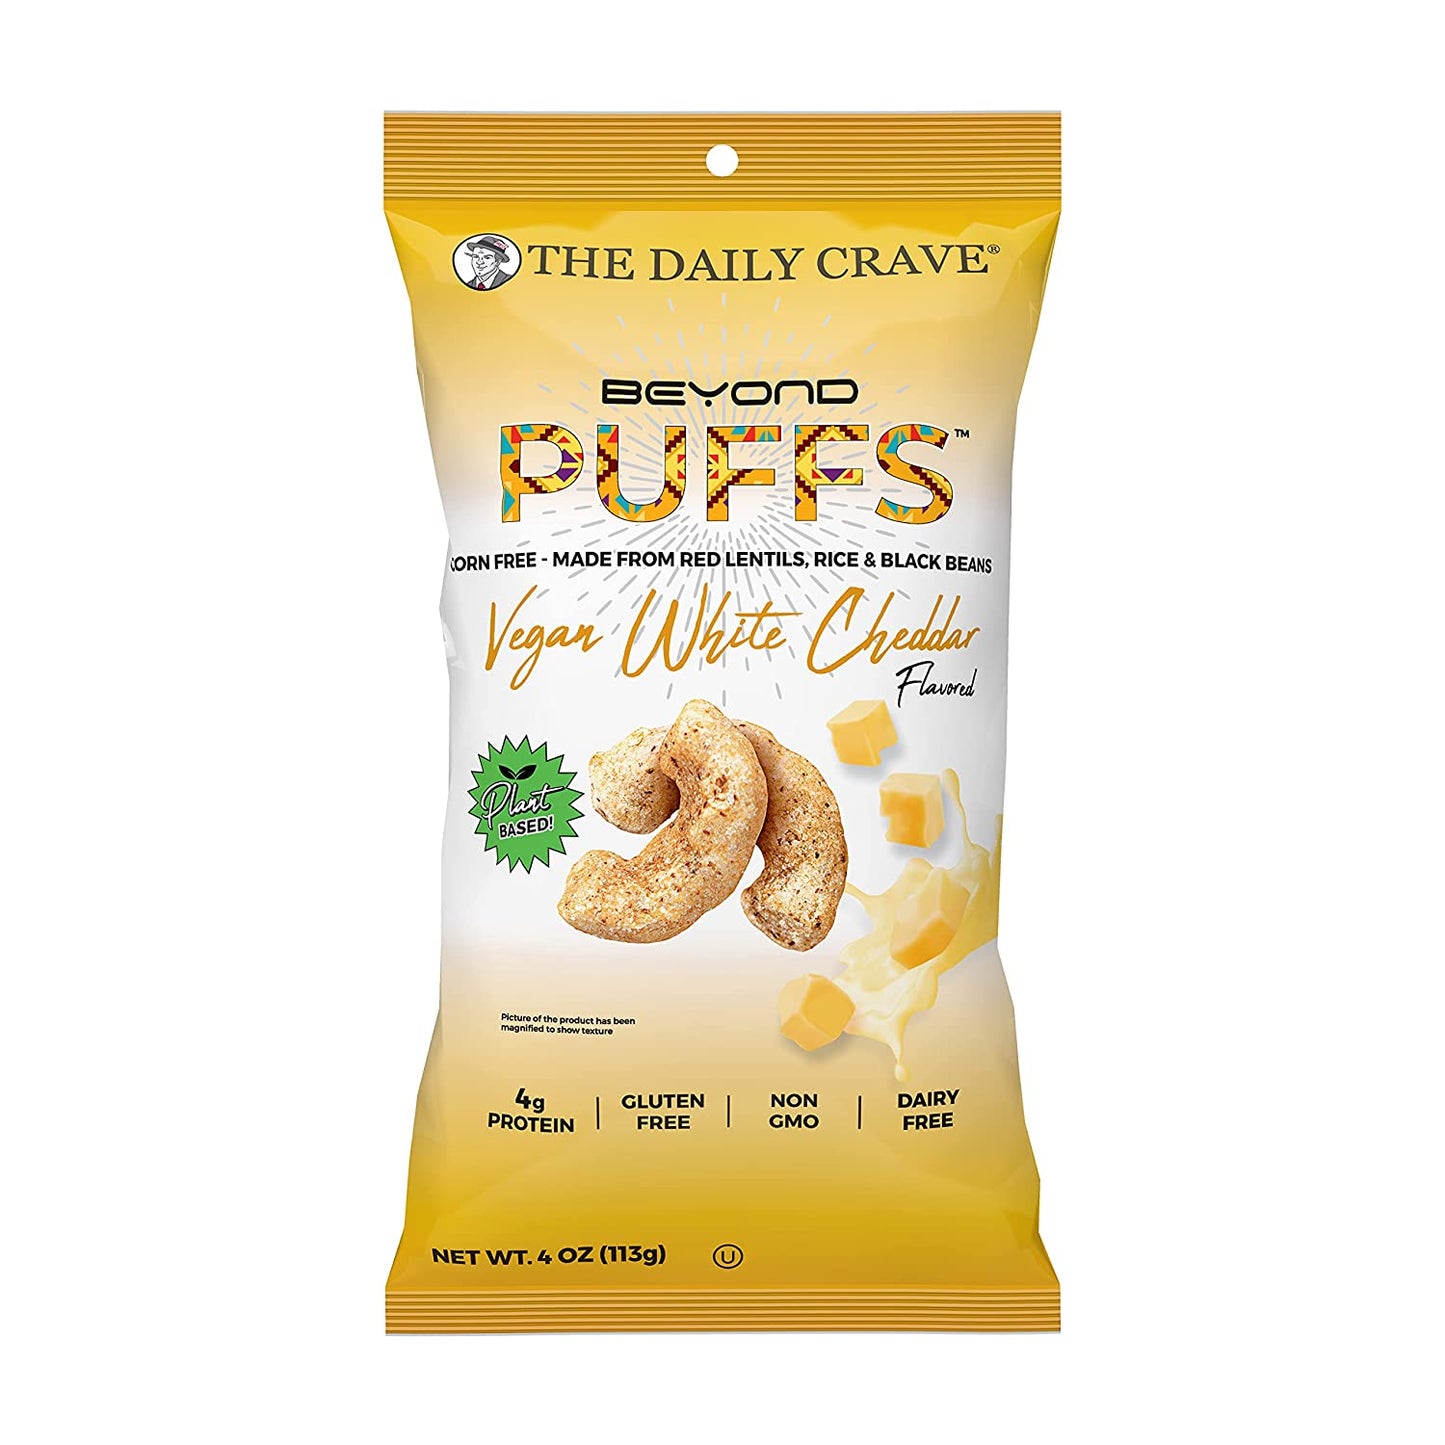 The Daily Crave Beyond Puffs Vegan White Cheddar 113g